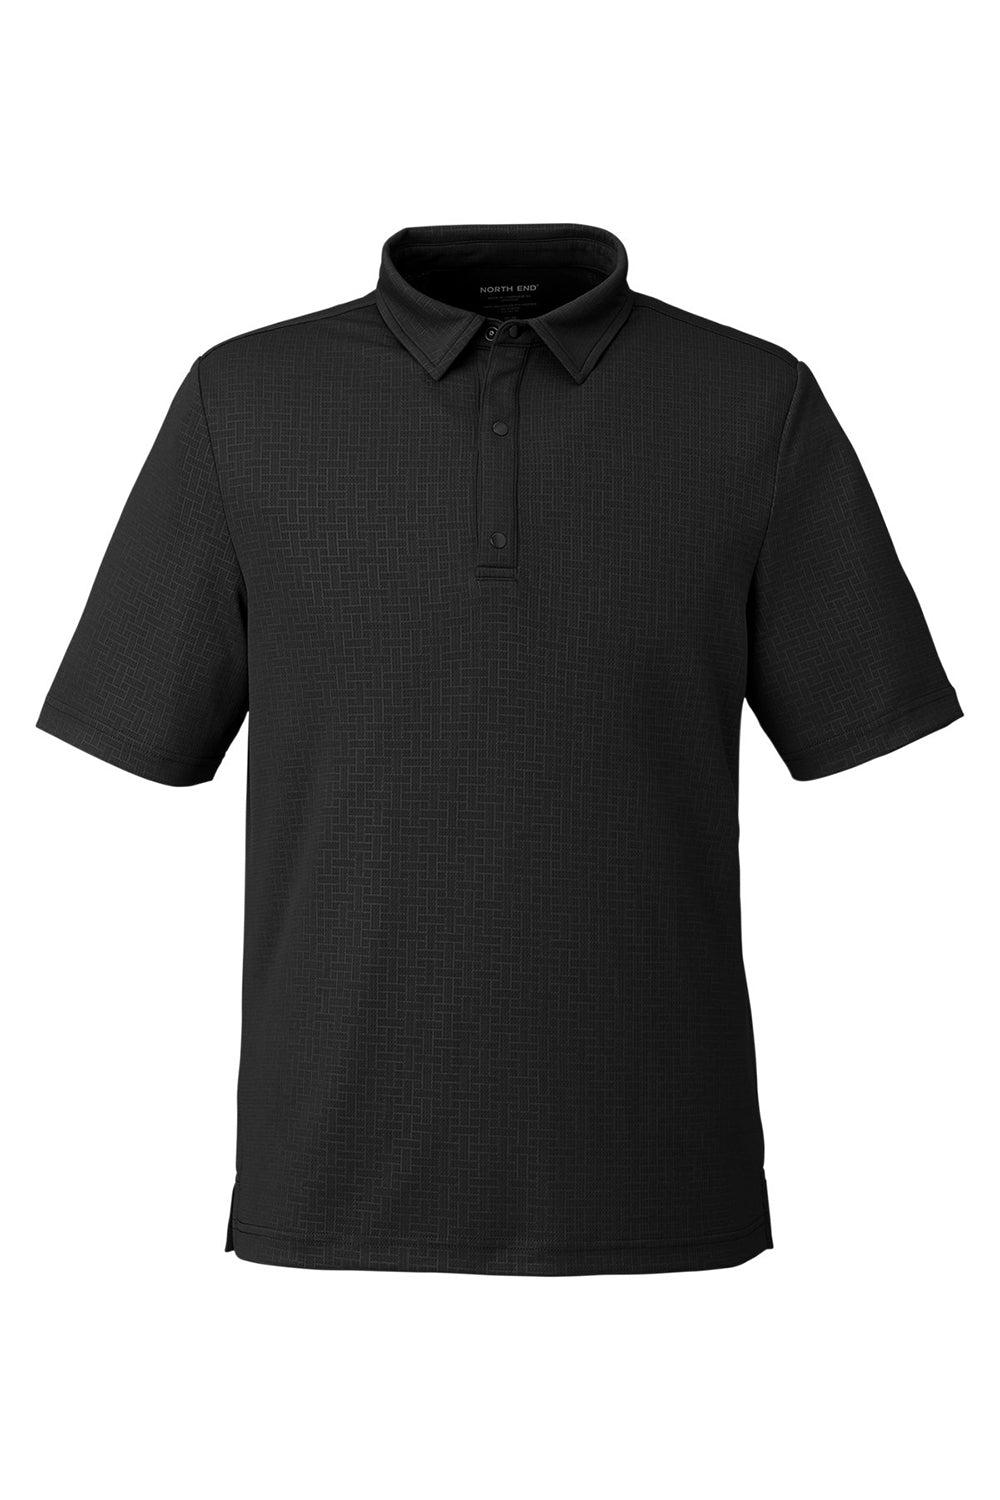 North End NE102 Mens Replay Recycled Short Sleeve Polo Shirt Black Flat Front